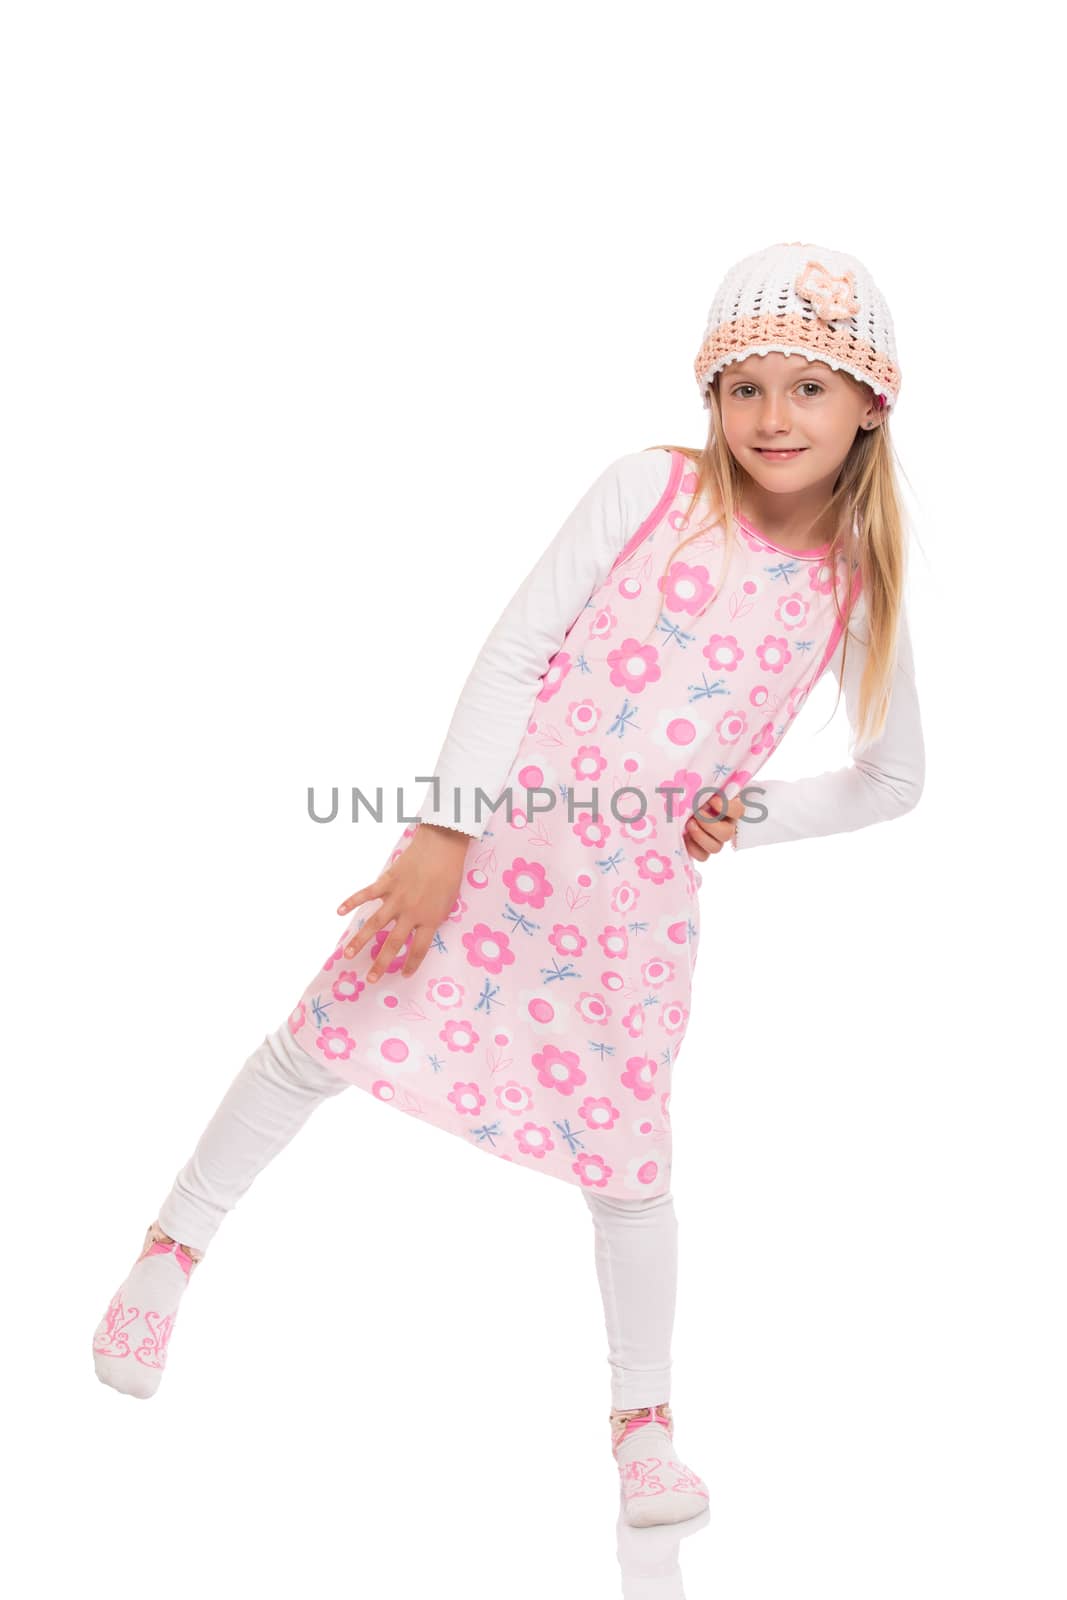 Full length portrait of a little girl with long hair wearing summer dress, knit cap and balancing at one leg. Isolated on white background.